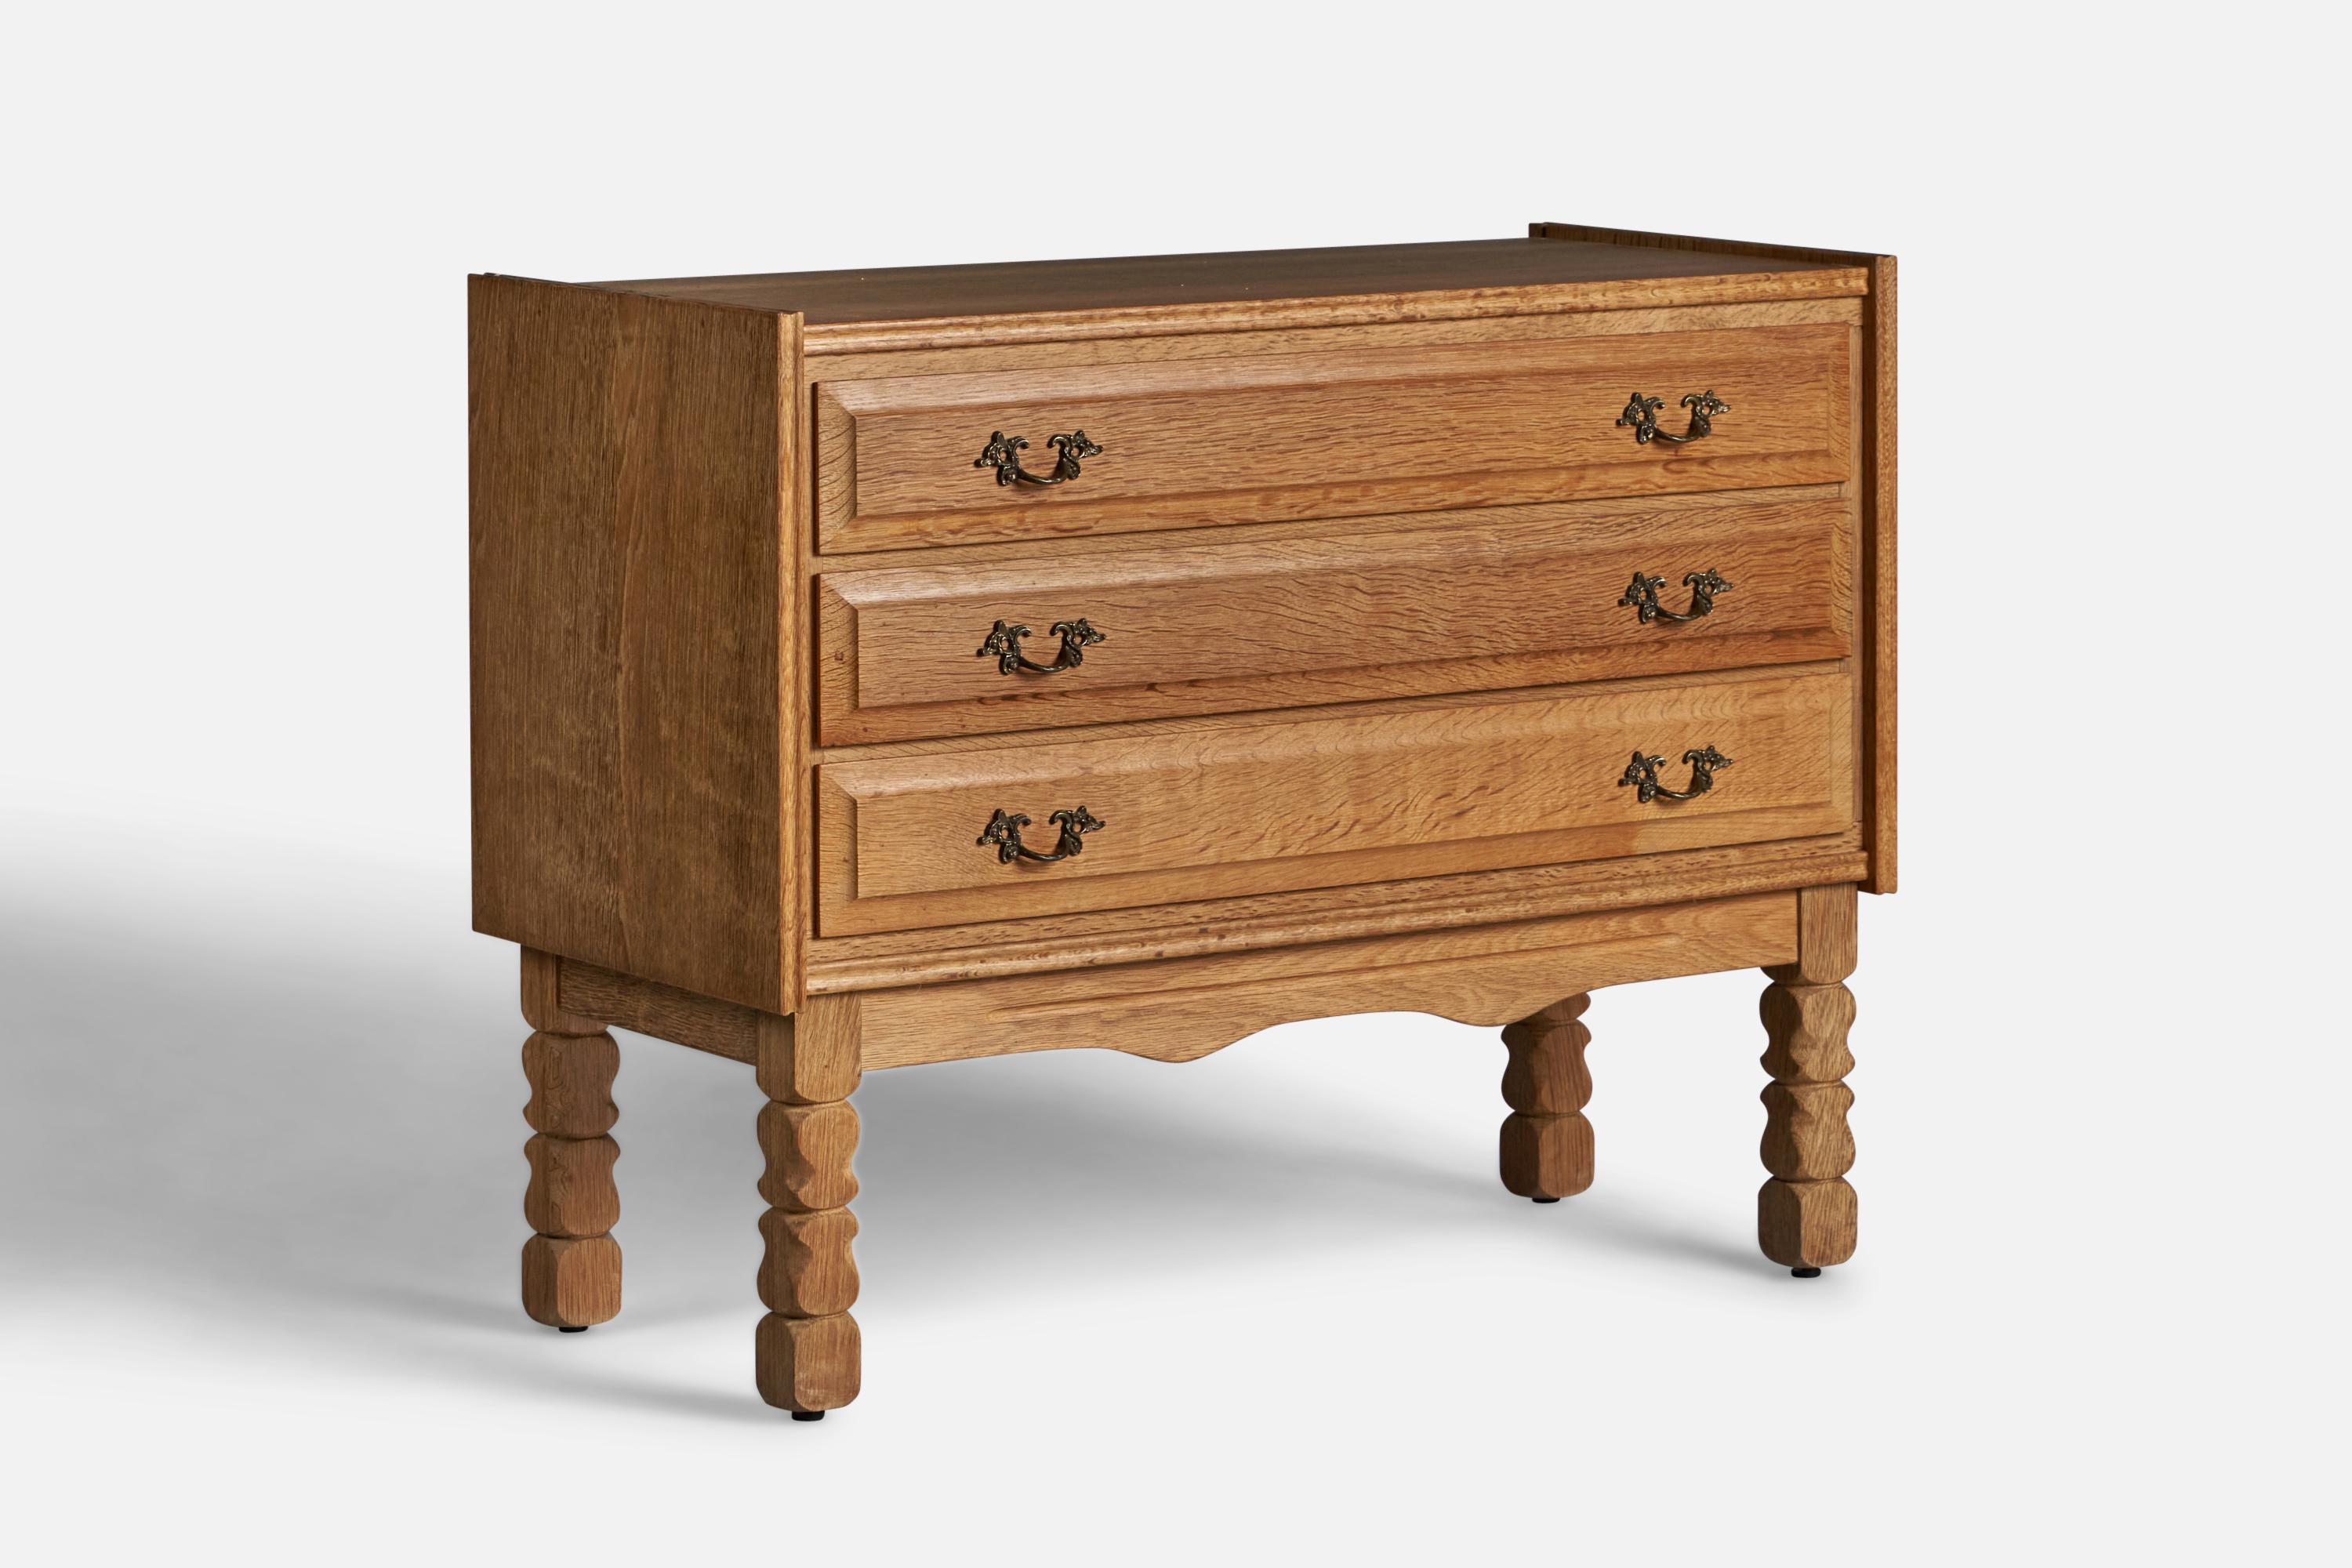 A caved solid oak chest of drawers designed and produced in Denmark, c. 1950s.